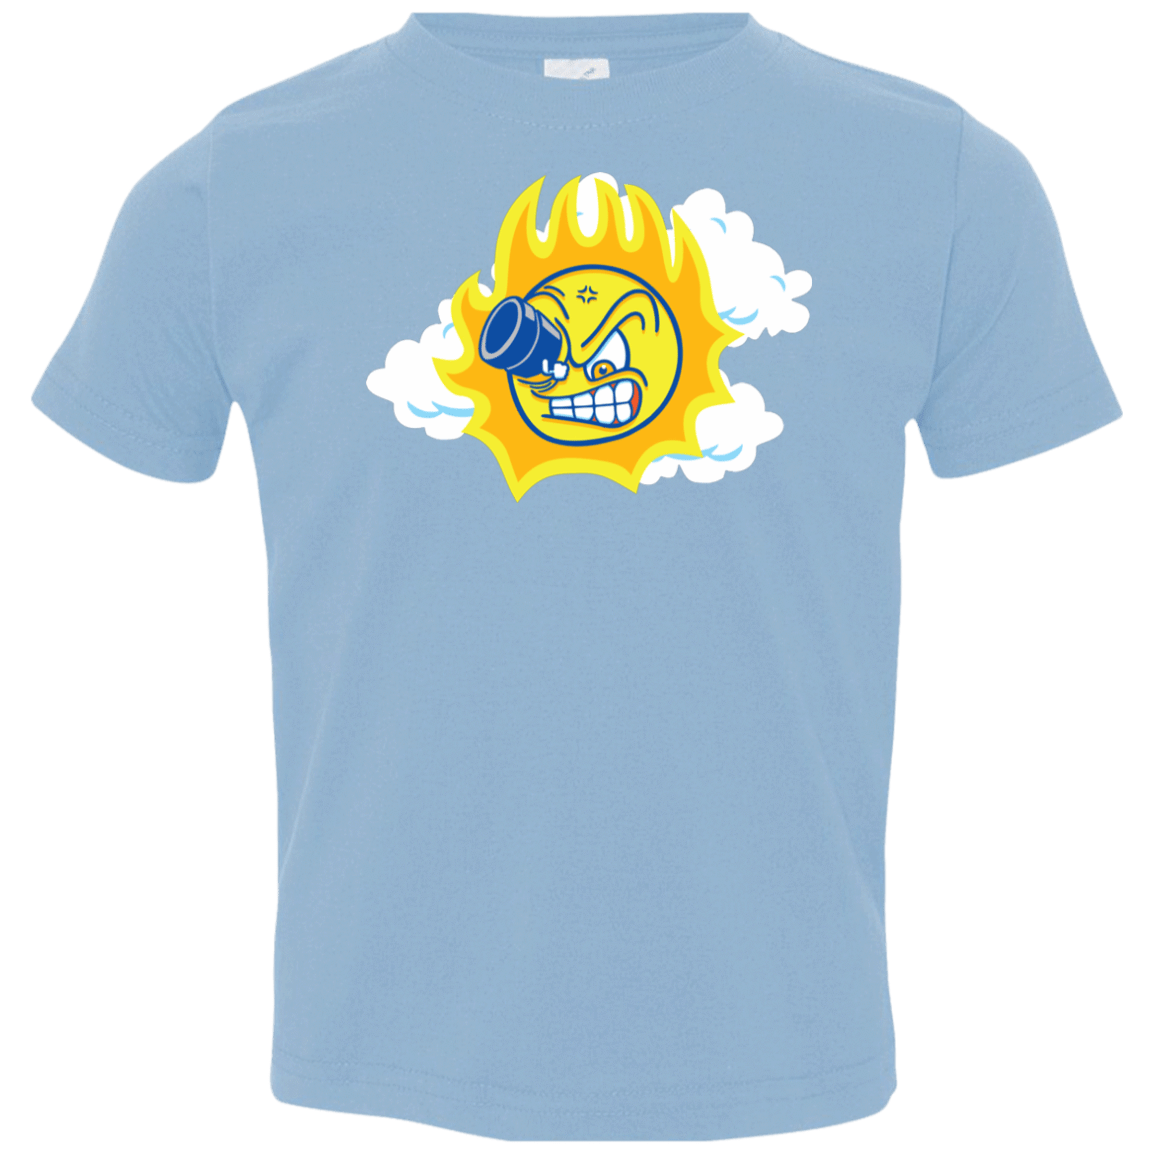 T-Shirts Light Blue / 2T Journey To The Angry Sun Toddler Premium T-Shirt